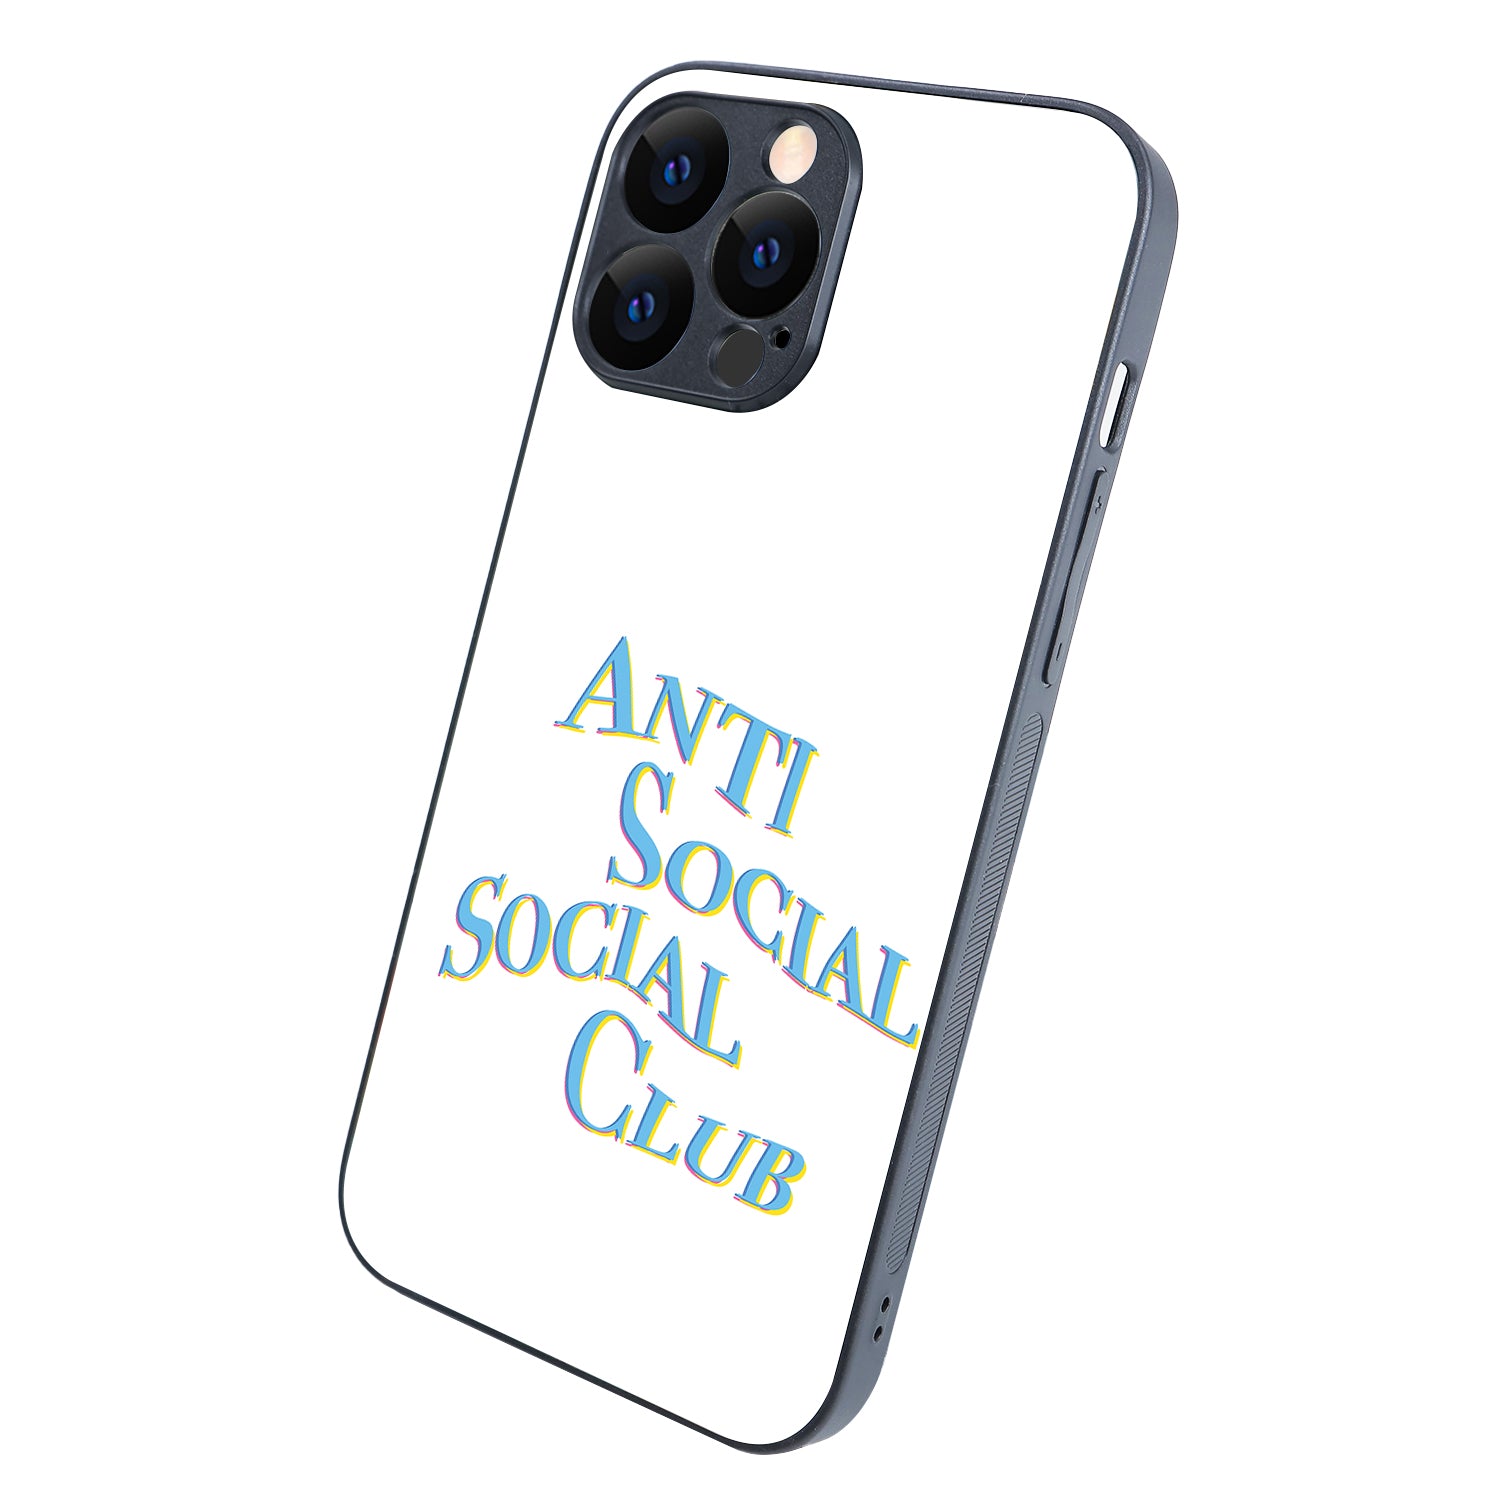 Social Club Motivational Quotes iPhone 13 Pro Max Case